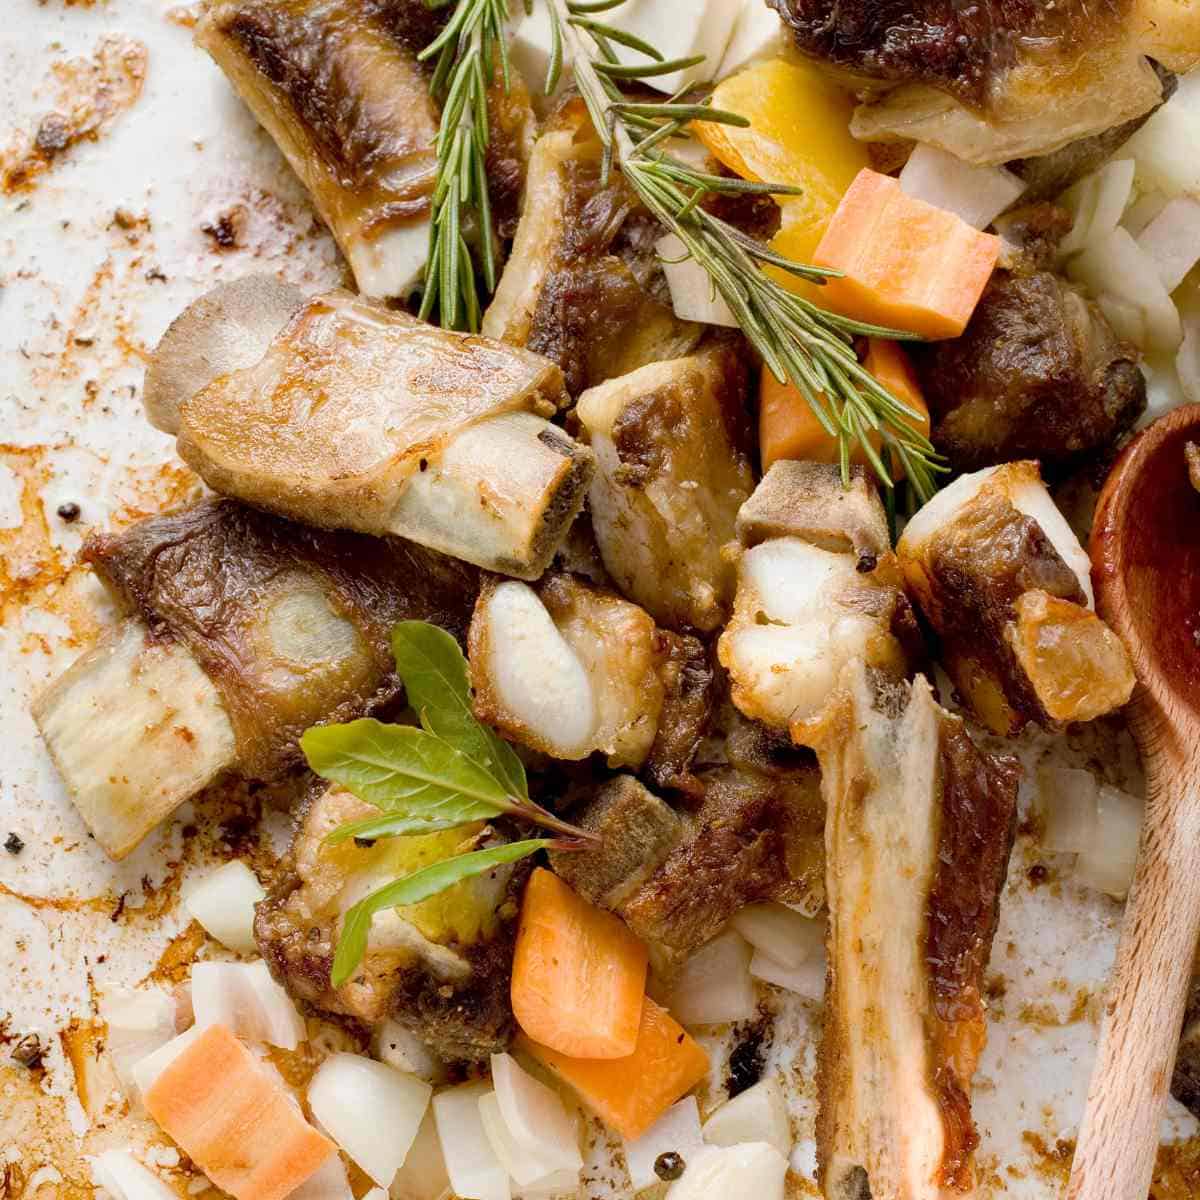 Veal bones with bits, carrots, onions, and herbs.